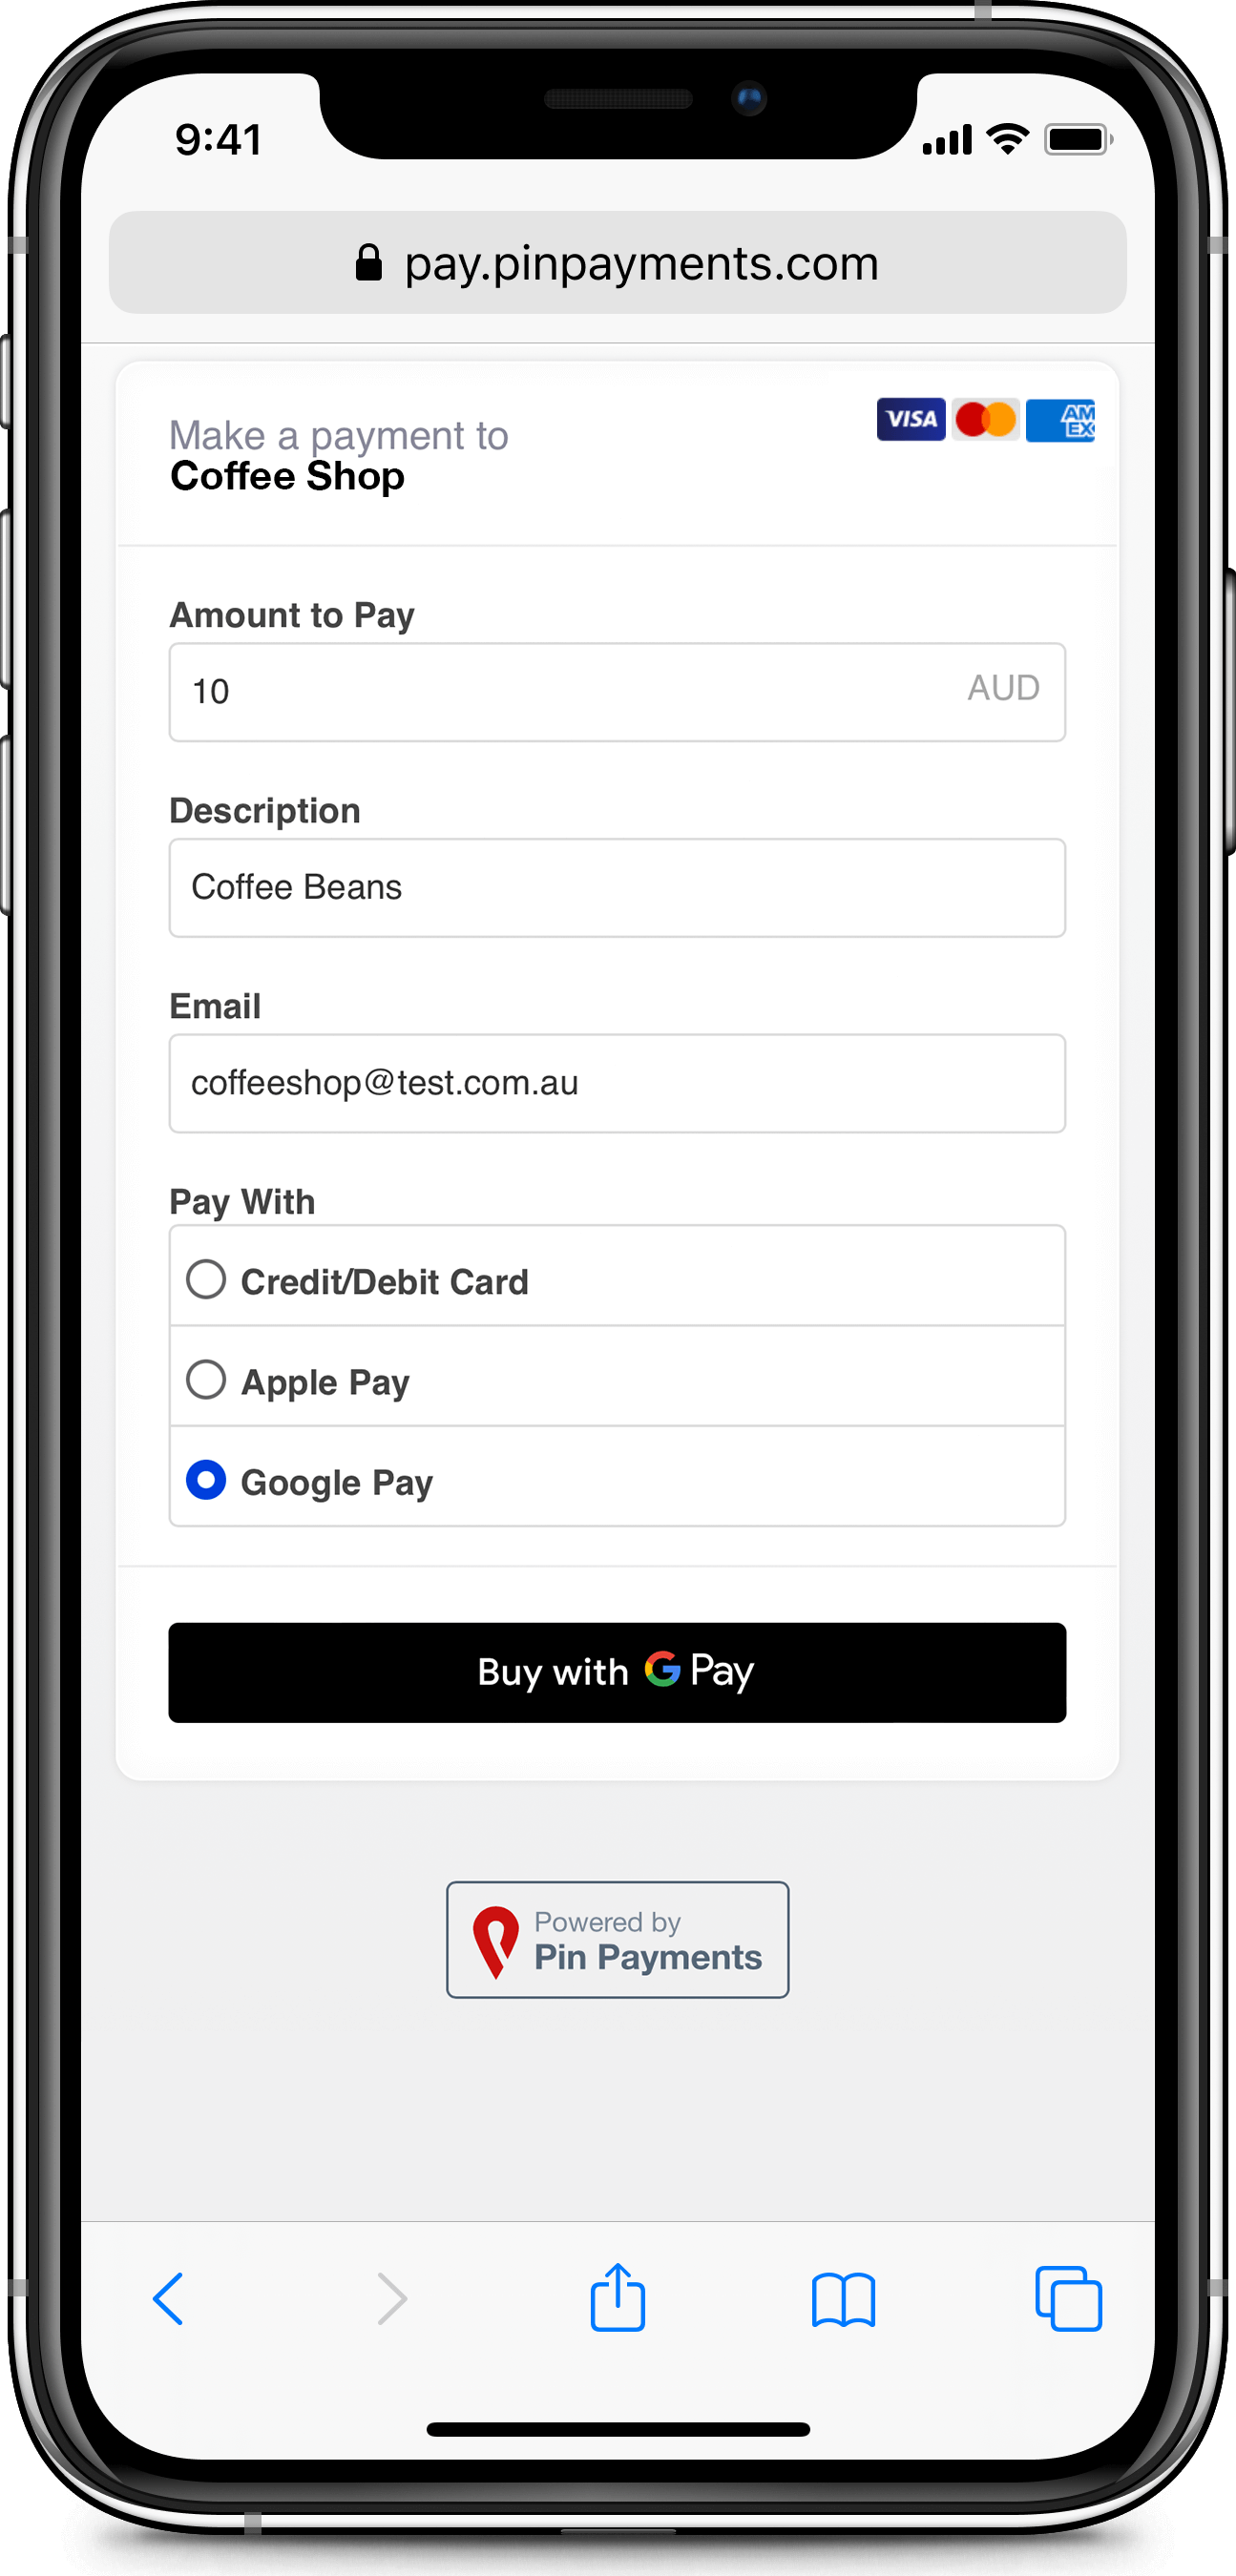 A user selects Google Pay as their payment method using Pin Payments' Payment Page.